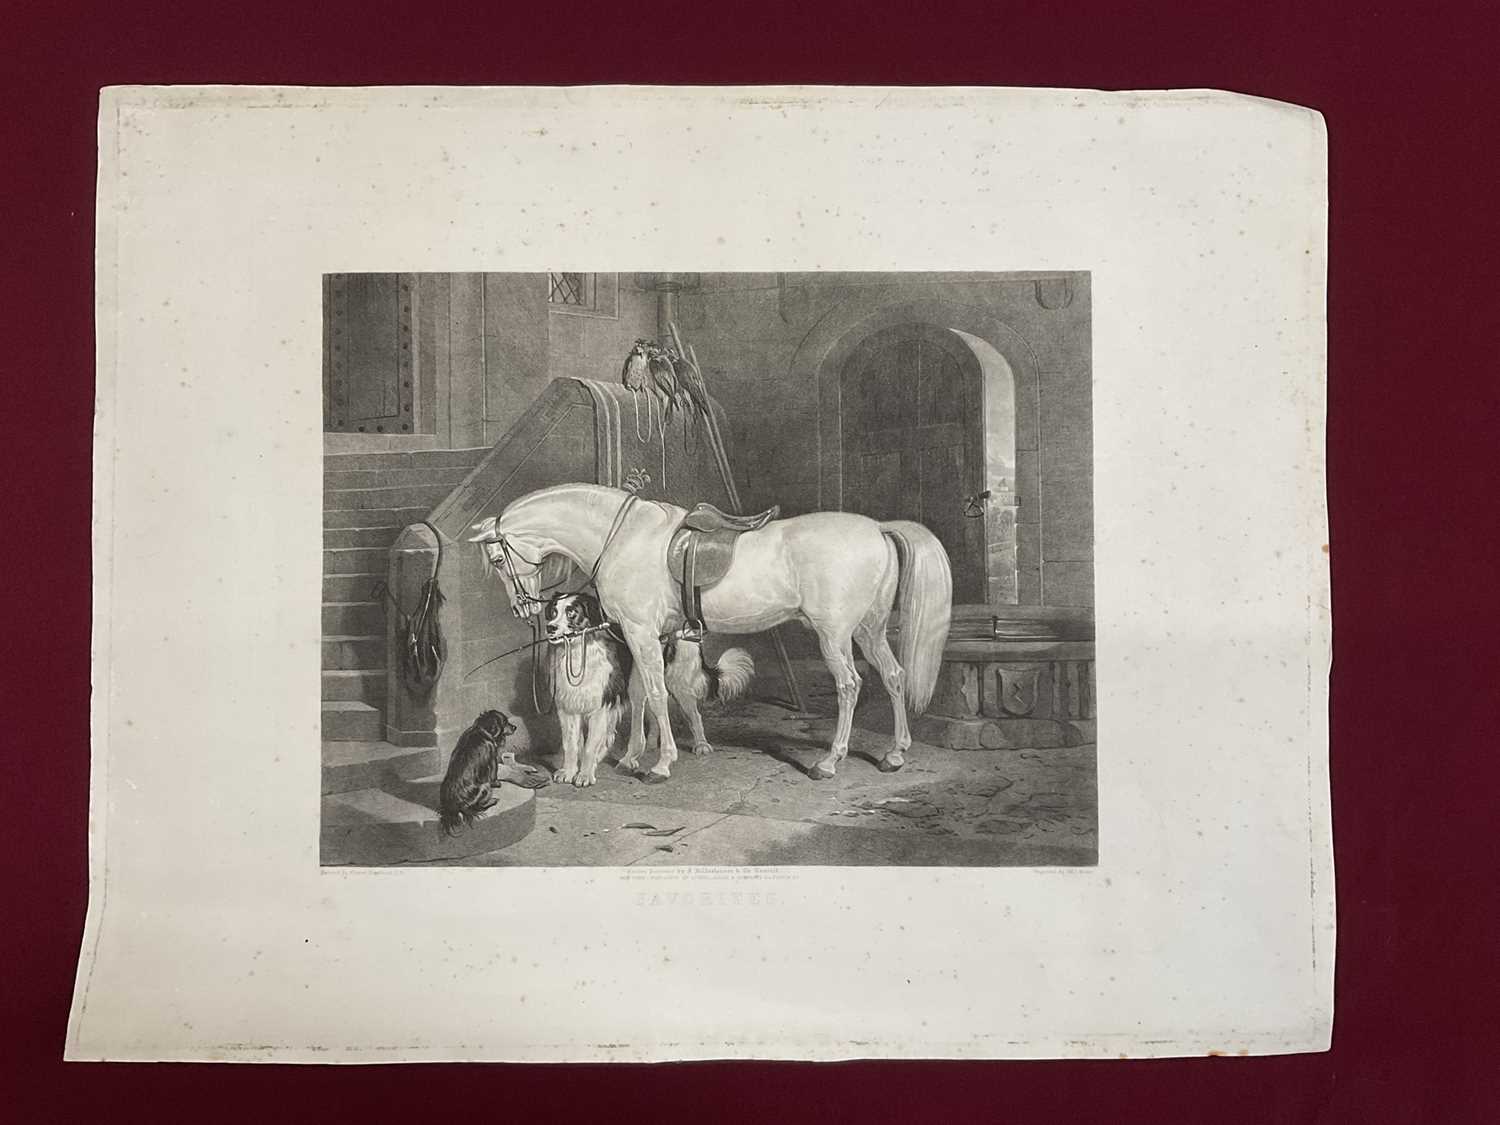 19th century engraving by William Giller after Sir Edwin Landseer - Favorites, published by Hildeshe